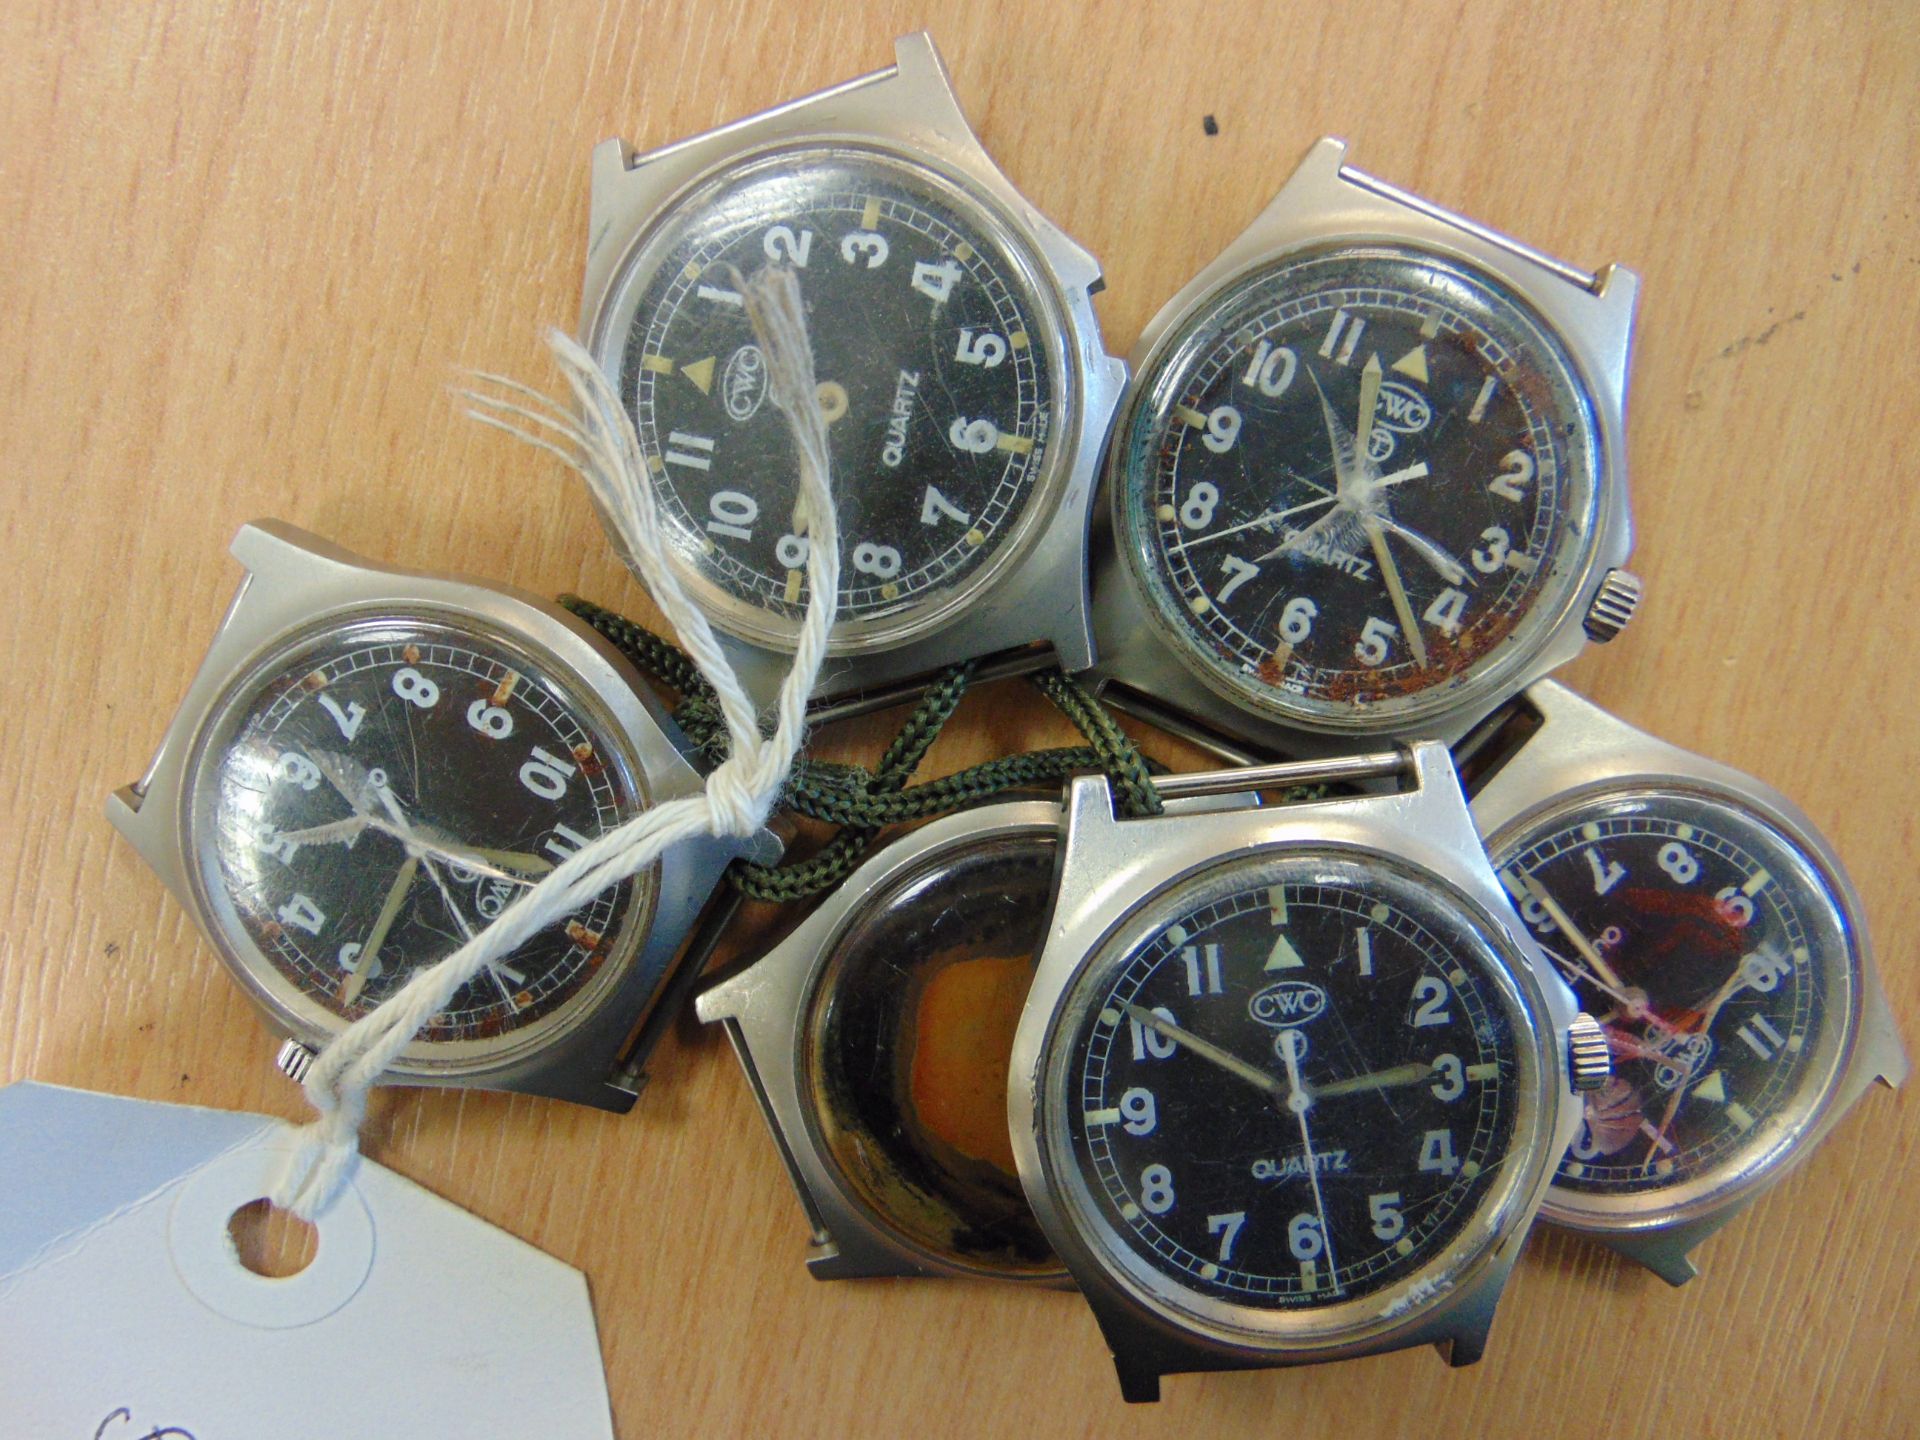 6X CWC W10 0552 SERVICES WATCHES - SPARES OR REPAIR